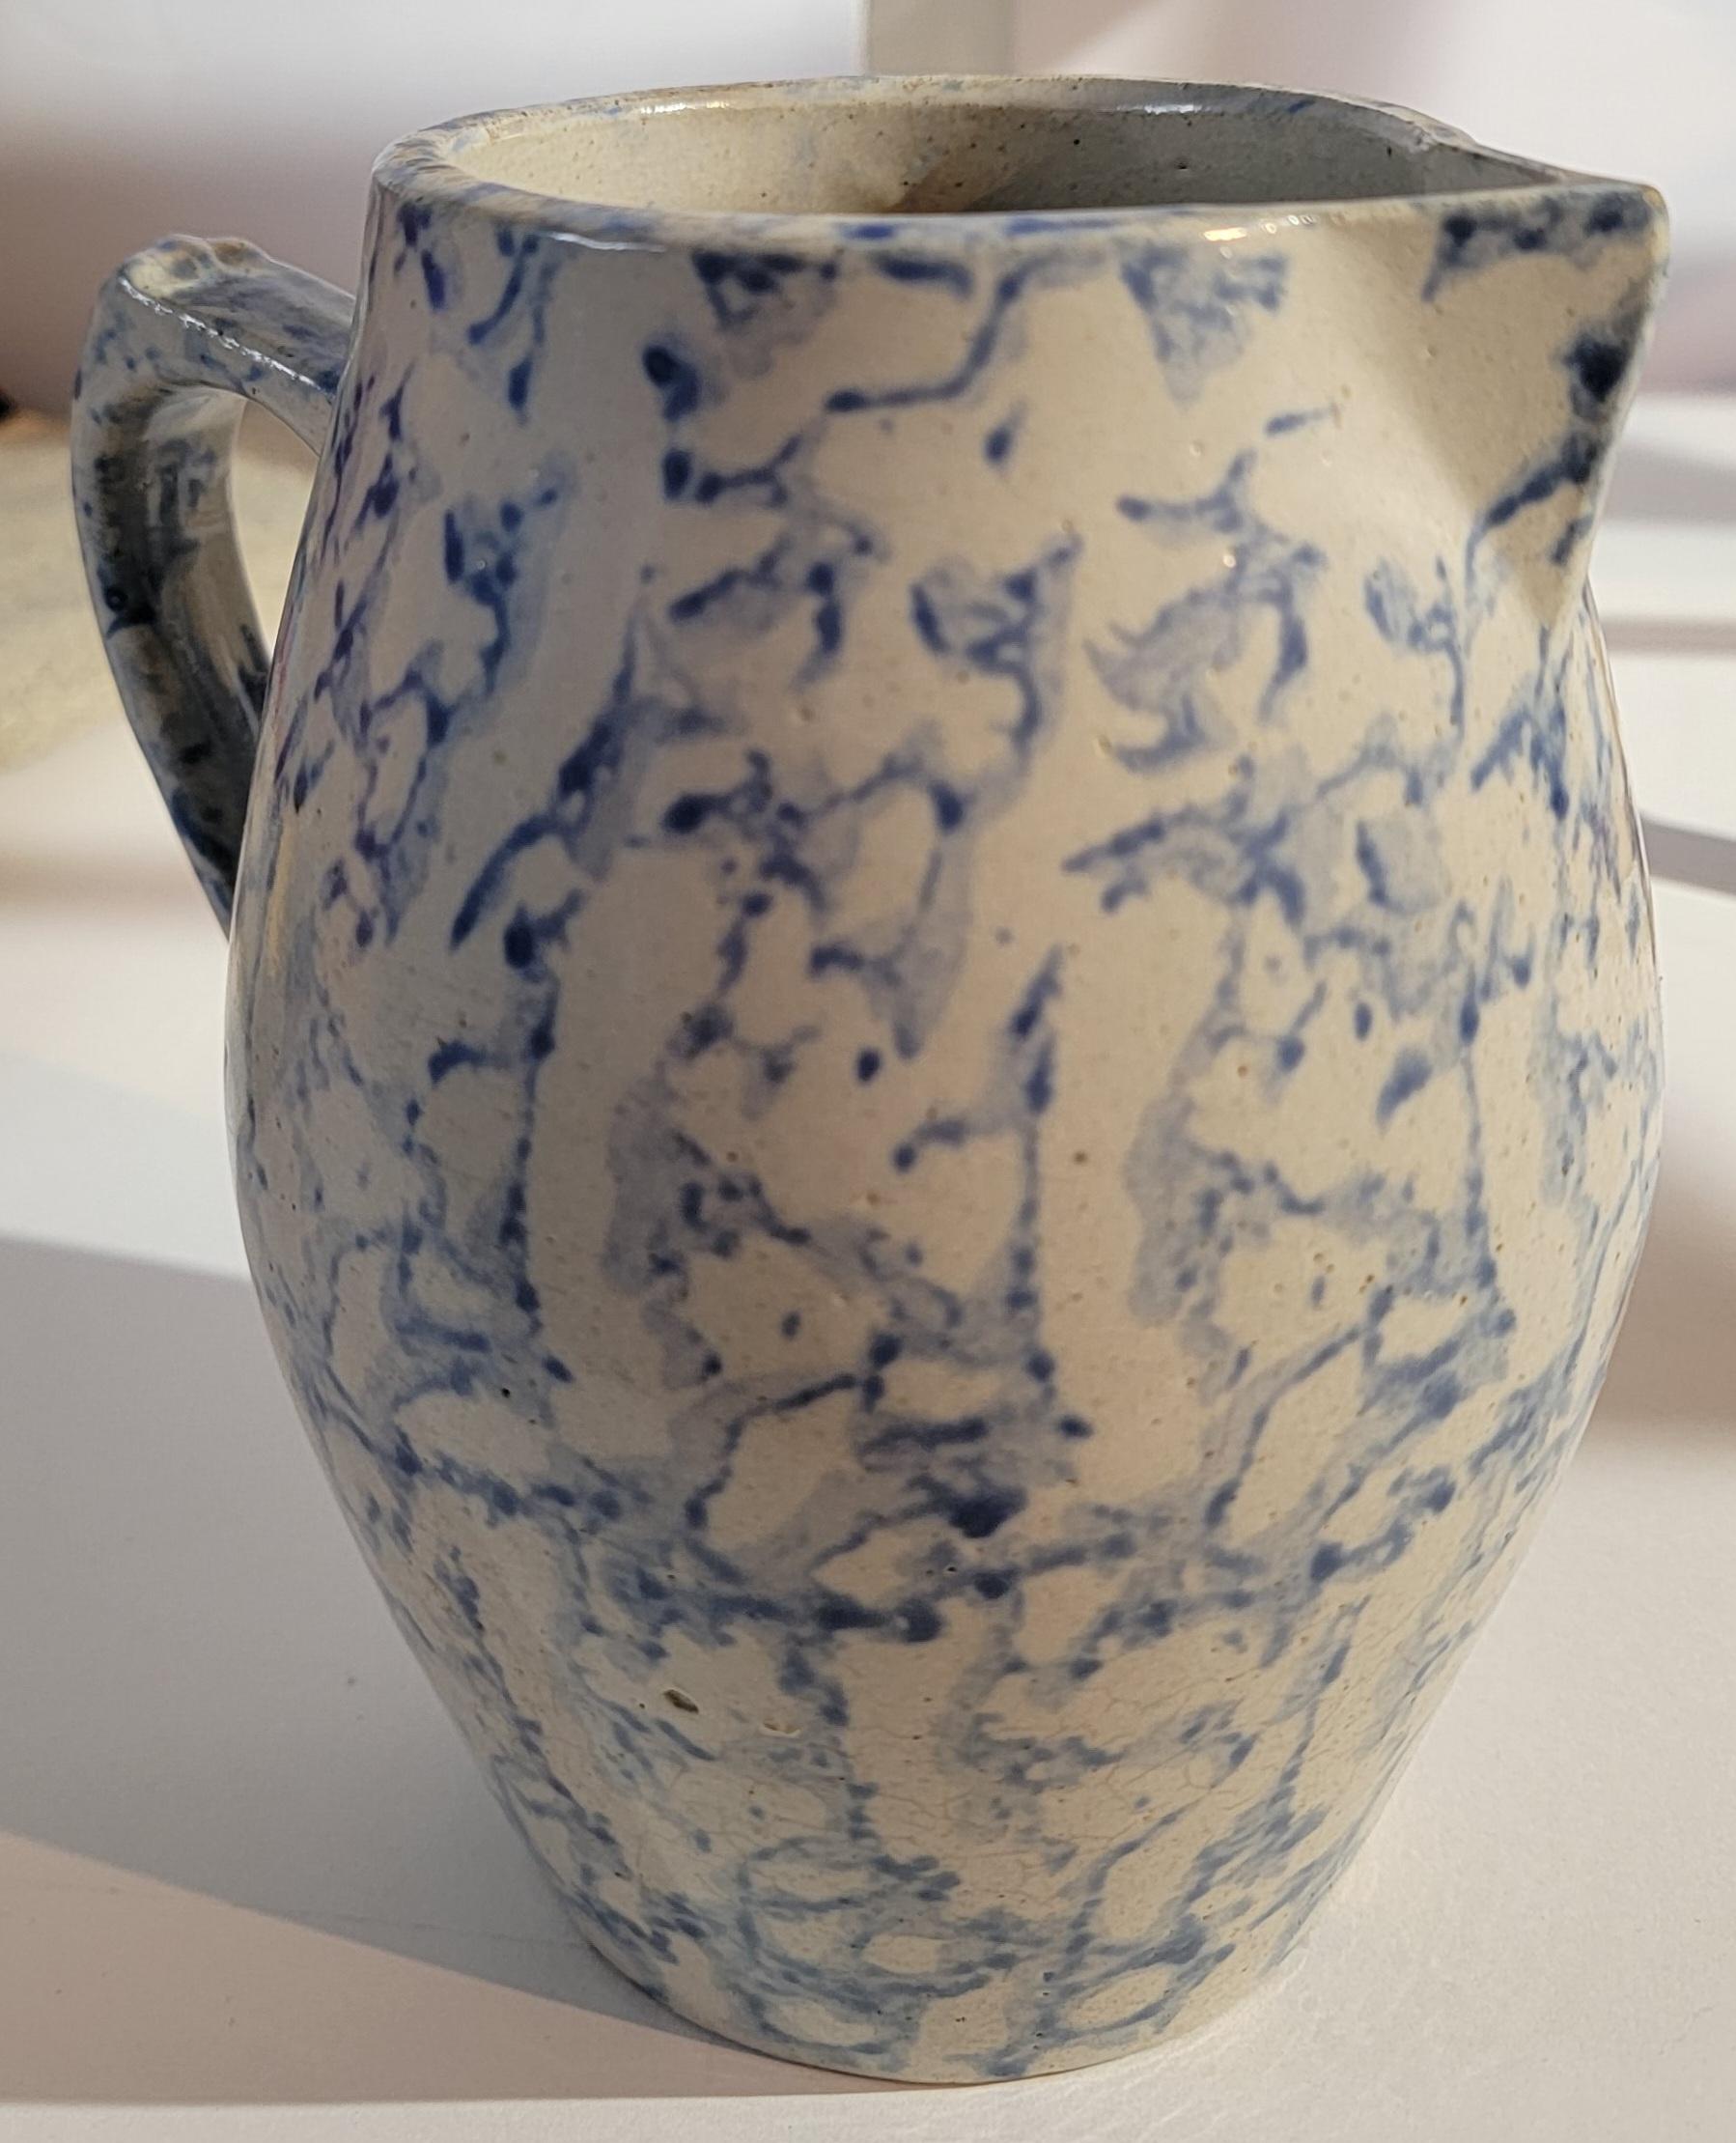 19Thc Sponge ware pottery milk or water pitcher in fine condition.This was found in a private collection from New England.